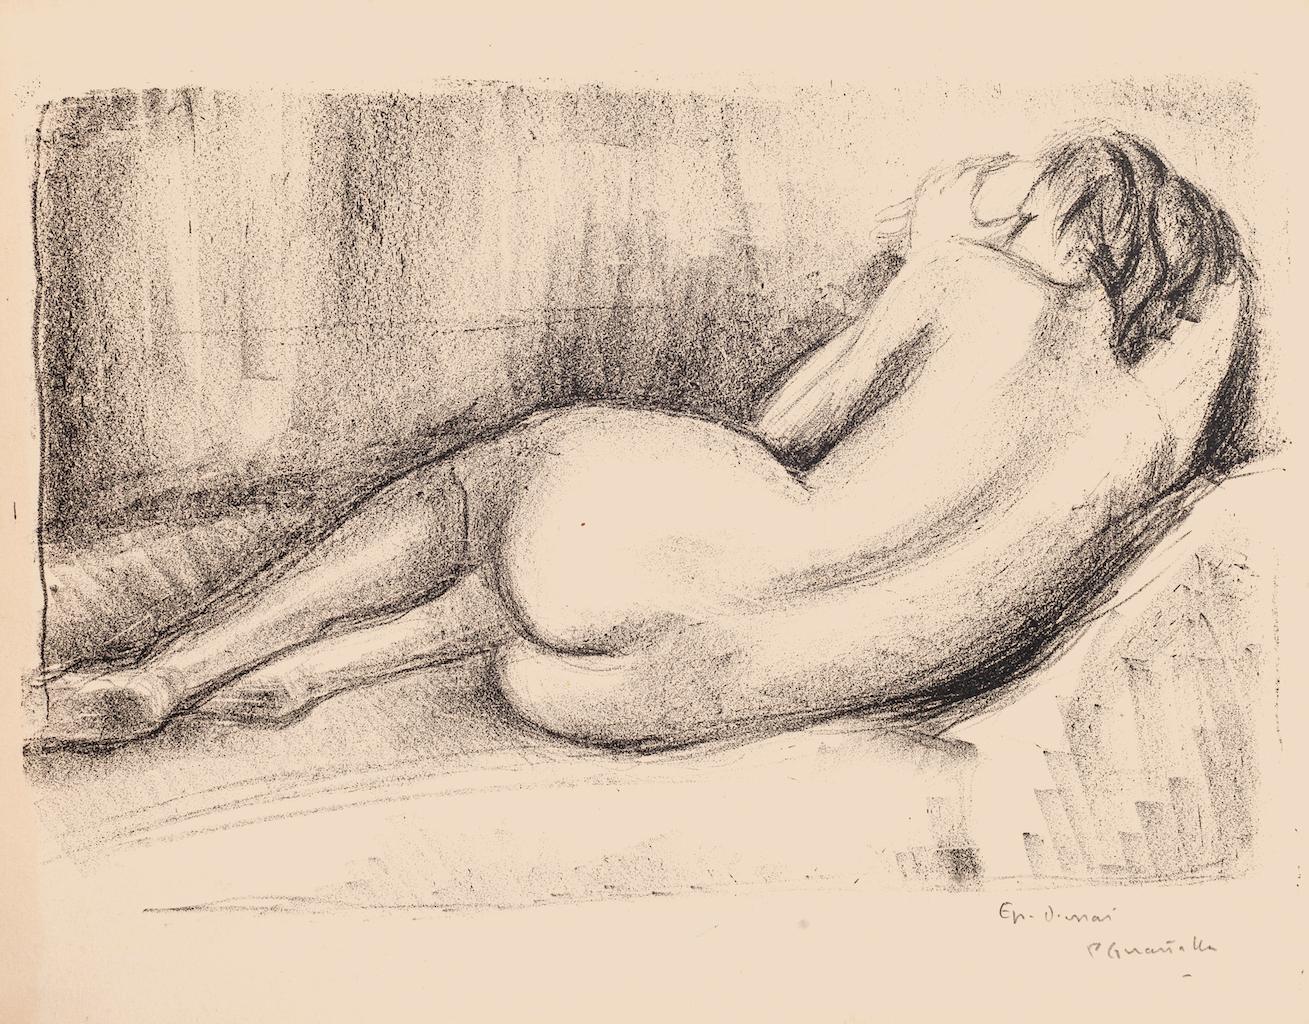 Nude is an original lithograph artwork on paper realized by Pierre Guastalla (1891-1968).

Hand-signed on the lower right in pencil.

The state of preservation is very good.

Sheet dimension:: 24.5 x 31 cm

The artwork represents a sleeping woman